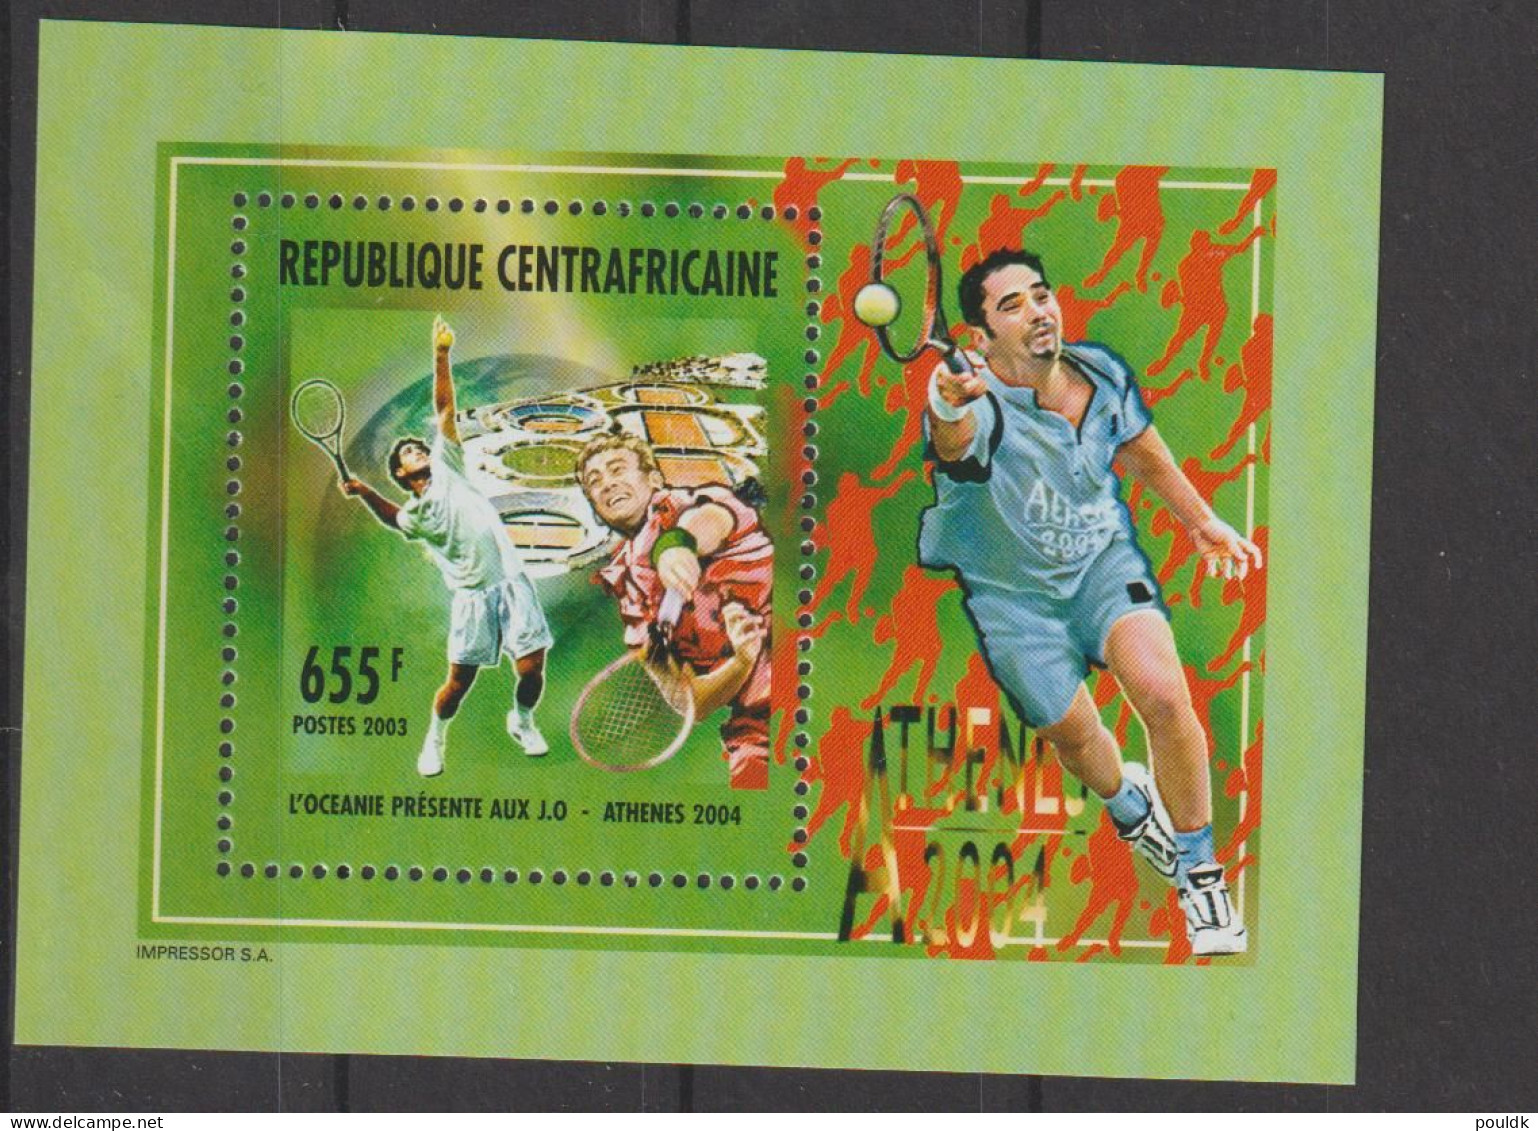 Republique Centrafricaine 2004 Olympic Games In Athens - Four Souvenir Sheets + 4 Stamps MNH/**. Postal Weight 0,04 Kg. - Sommer 2004: Athen